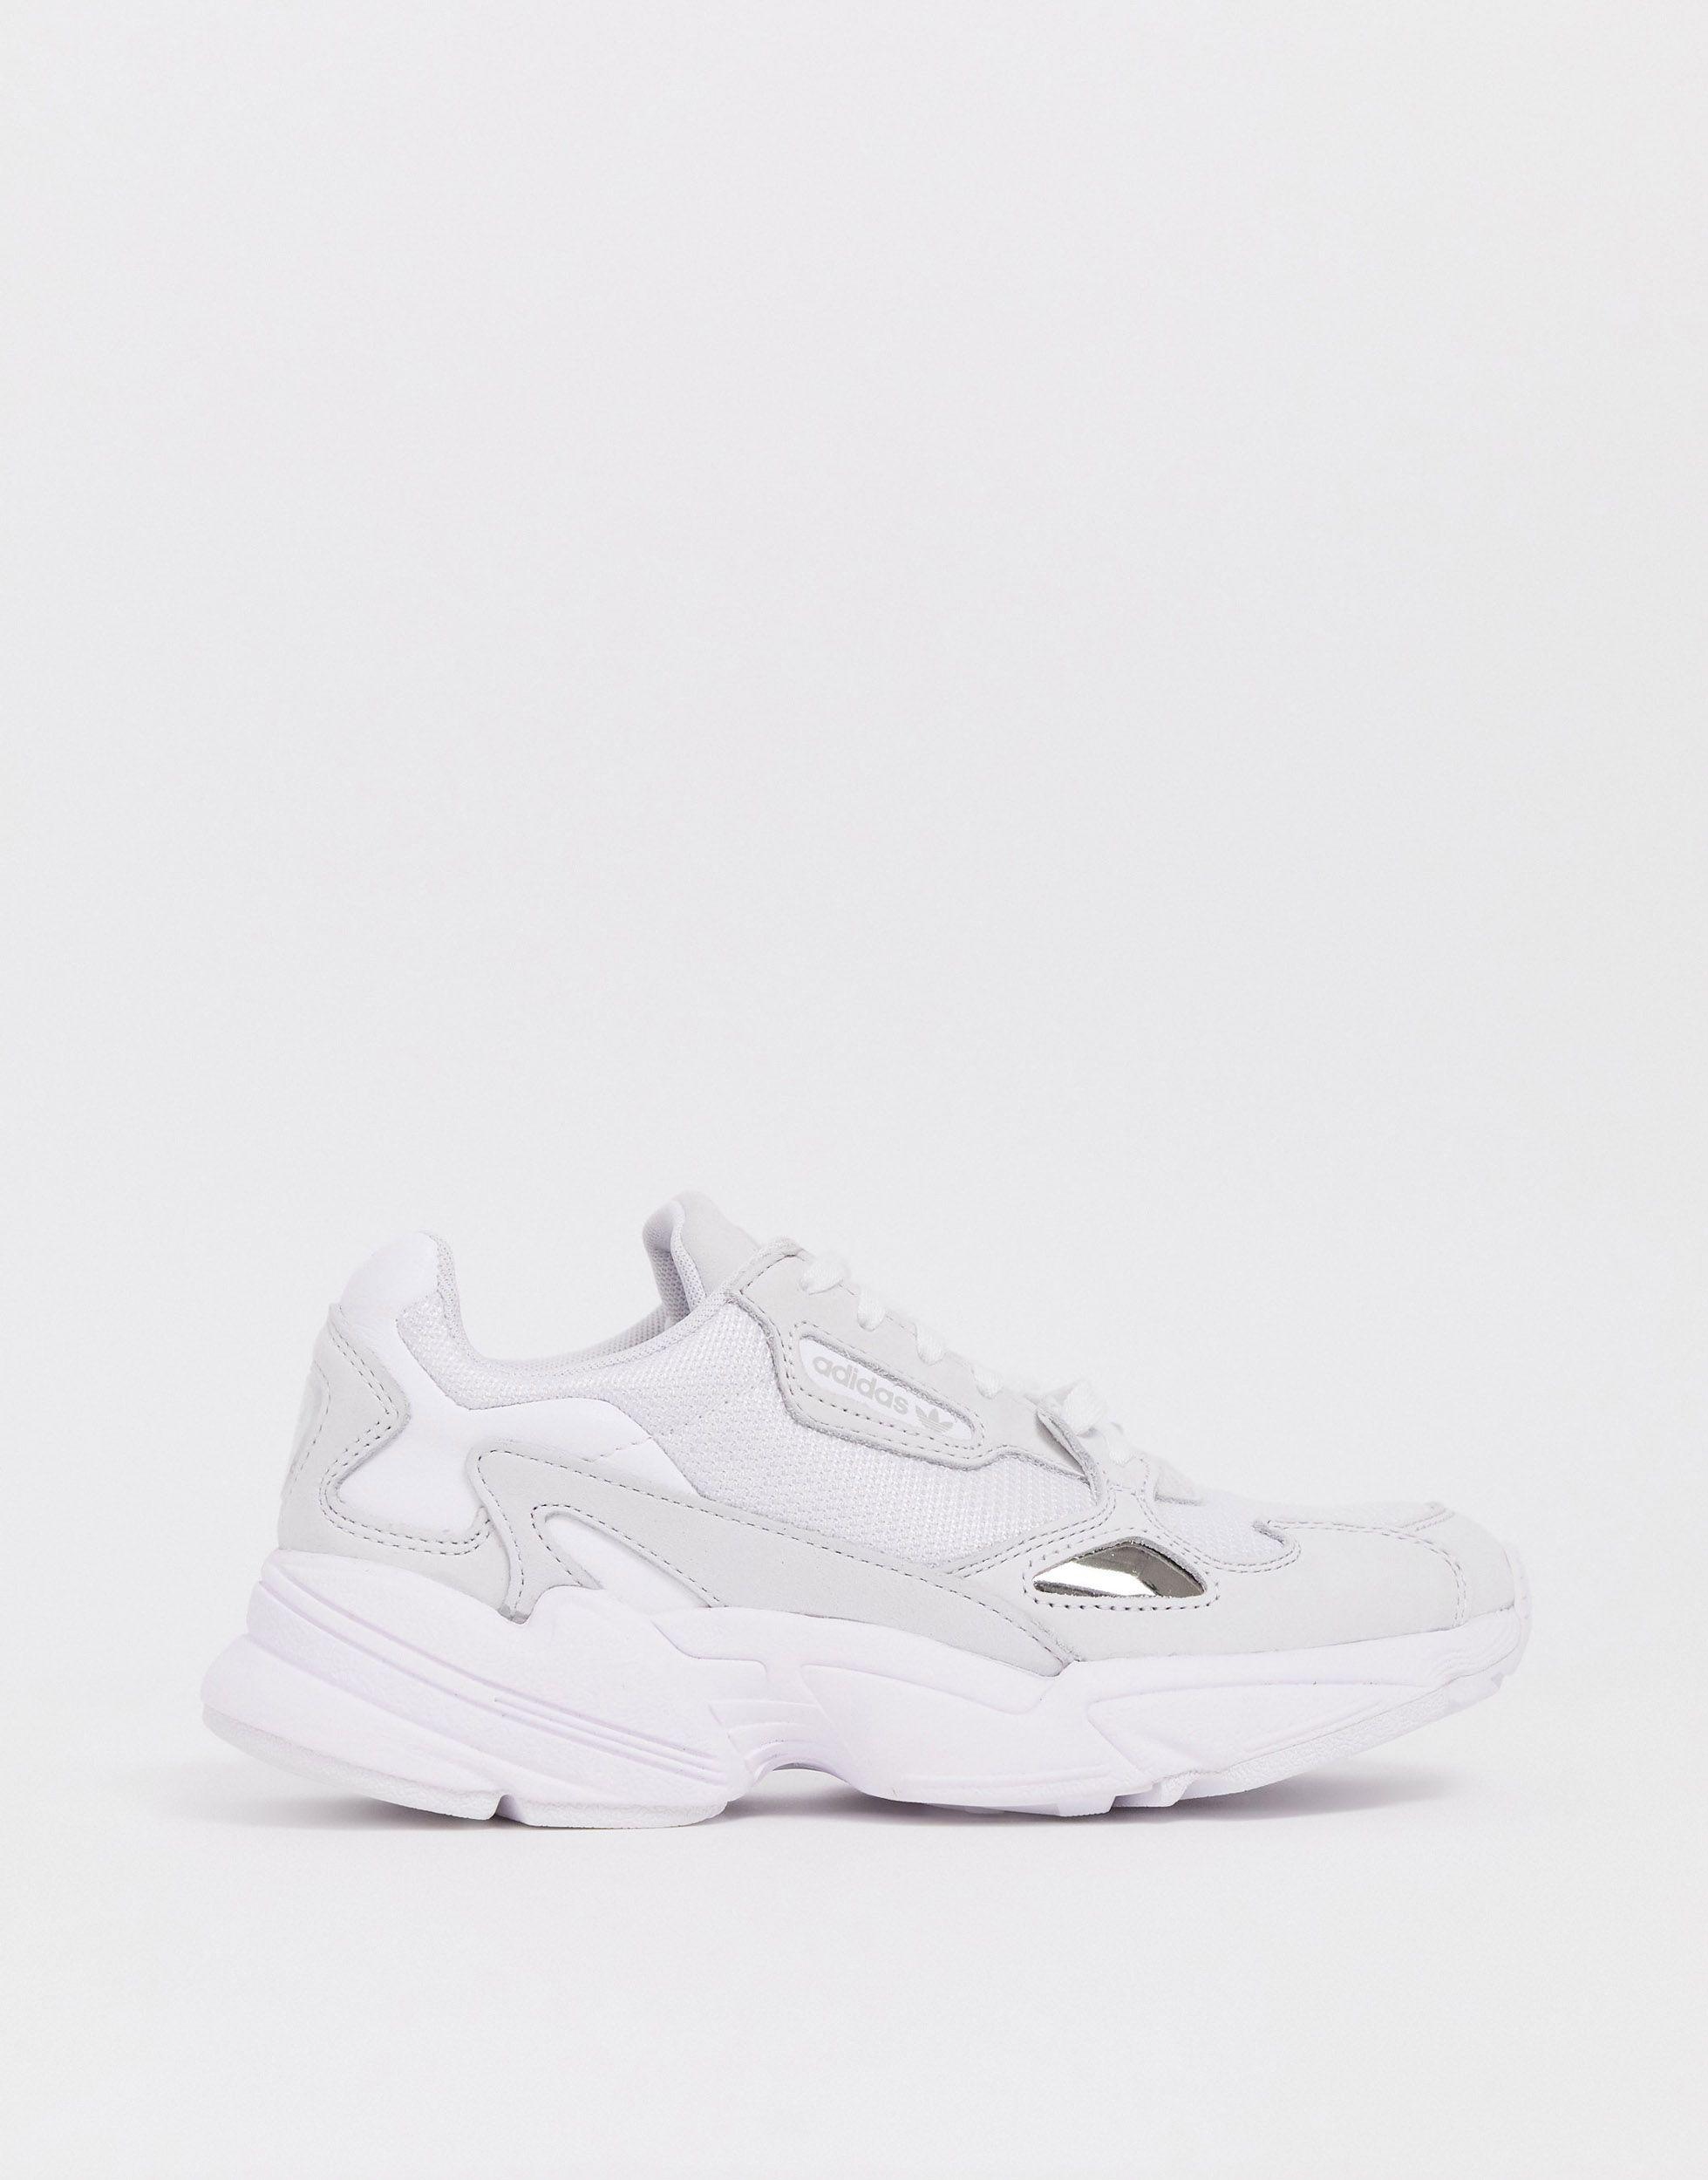 adidas Originals Suede Falcon in White/White/Crystal White (White) - Save  50% | Lyst